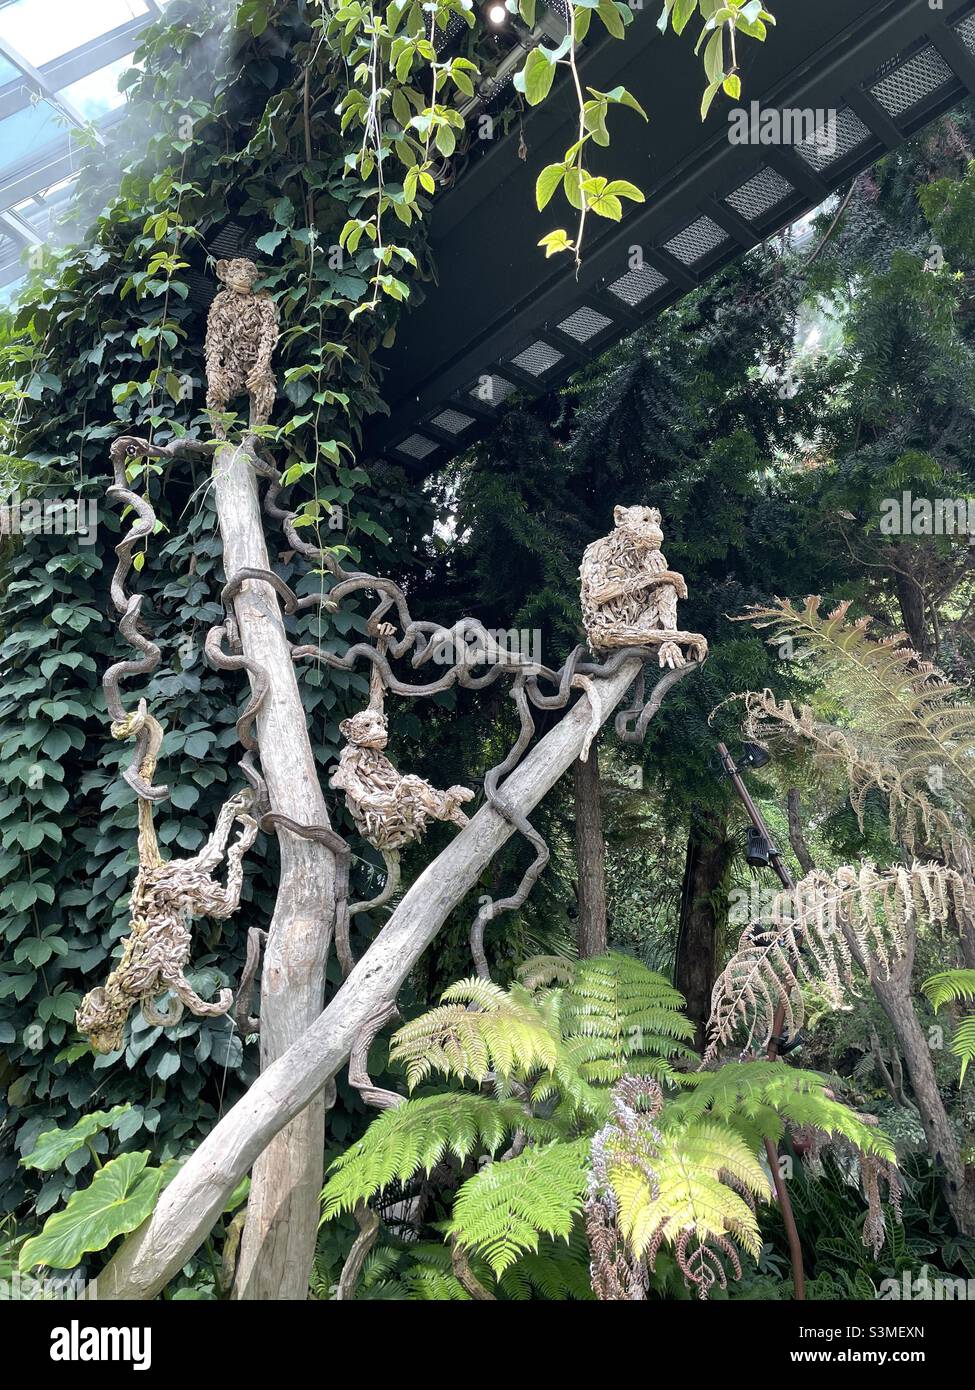 Monkeys made of wood sitting on a branch Stock Photo